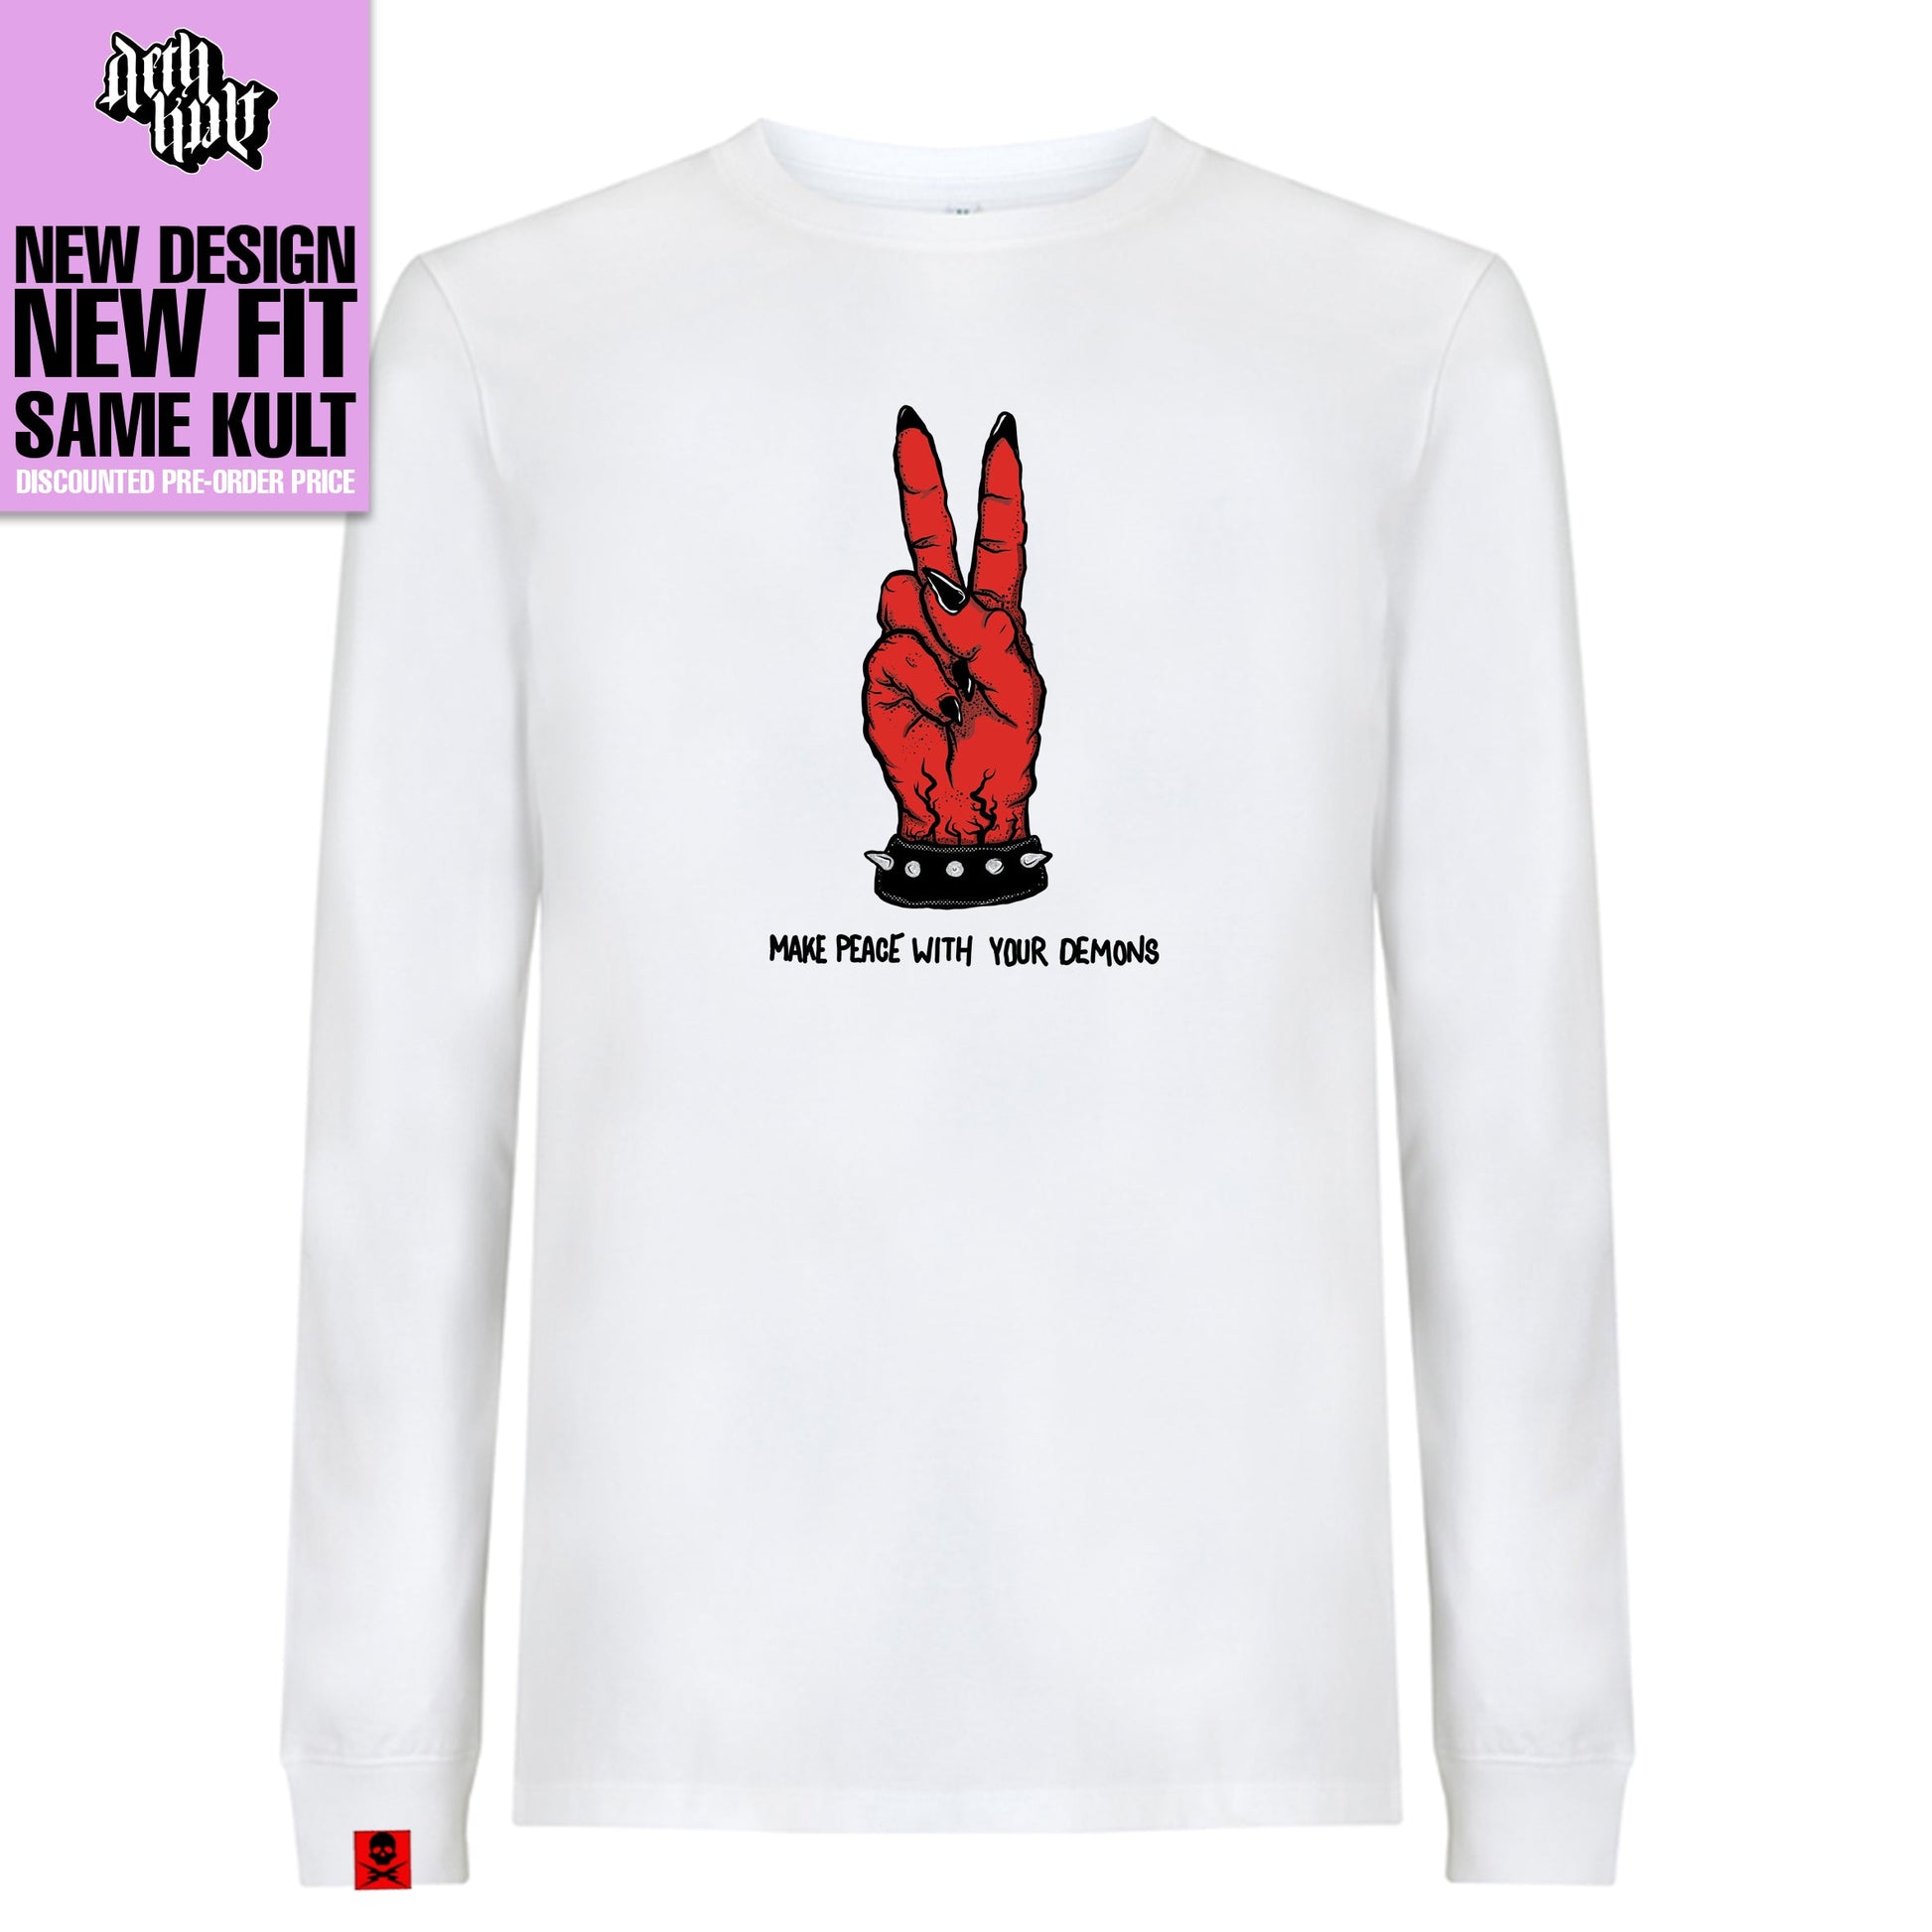 'Make Peace With Your Demons' Long sleeve T-Shirt (White) - Deth Kult